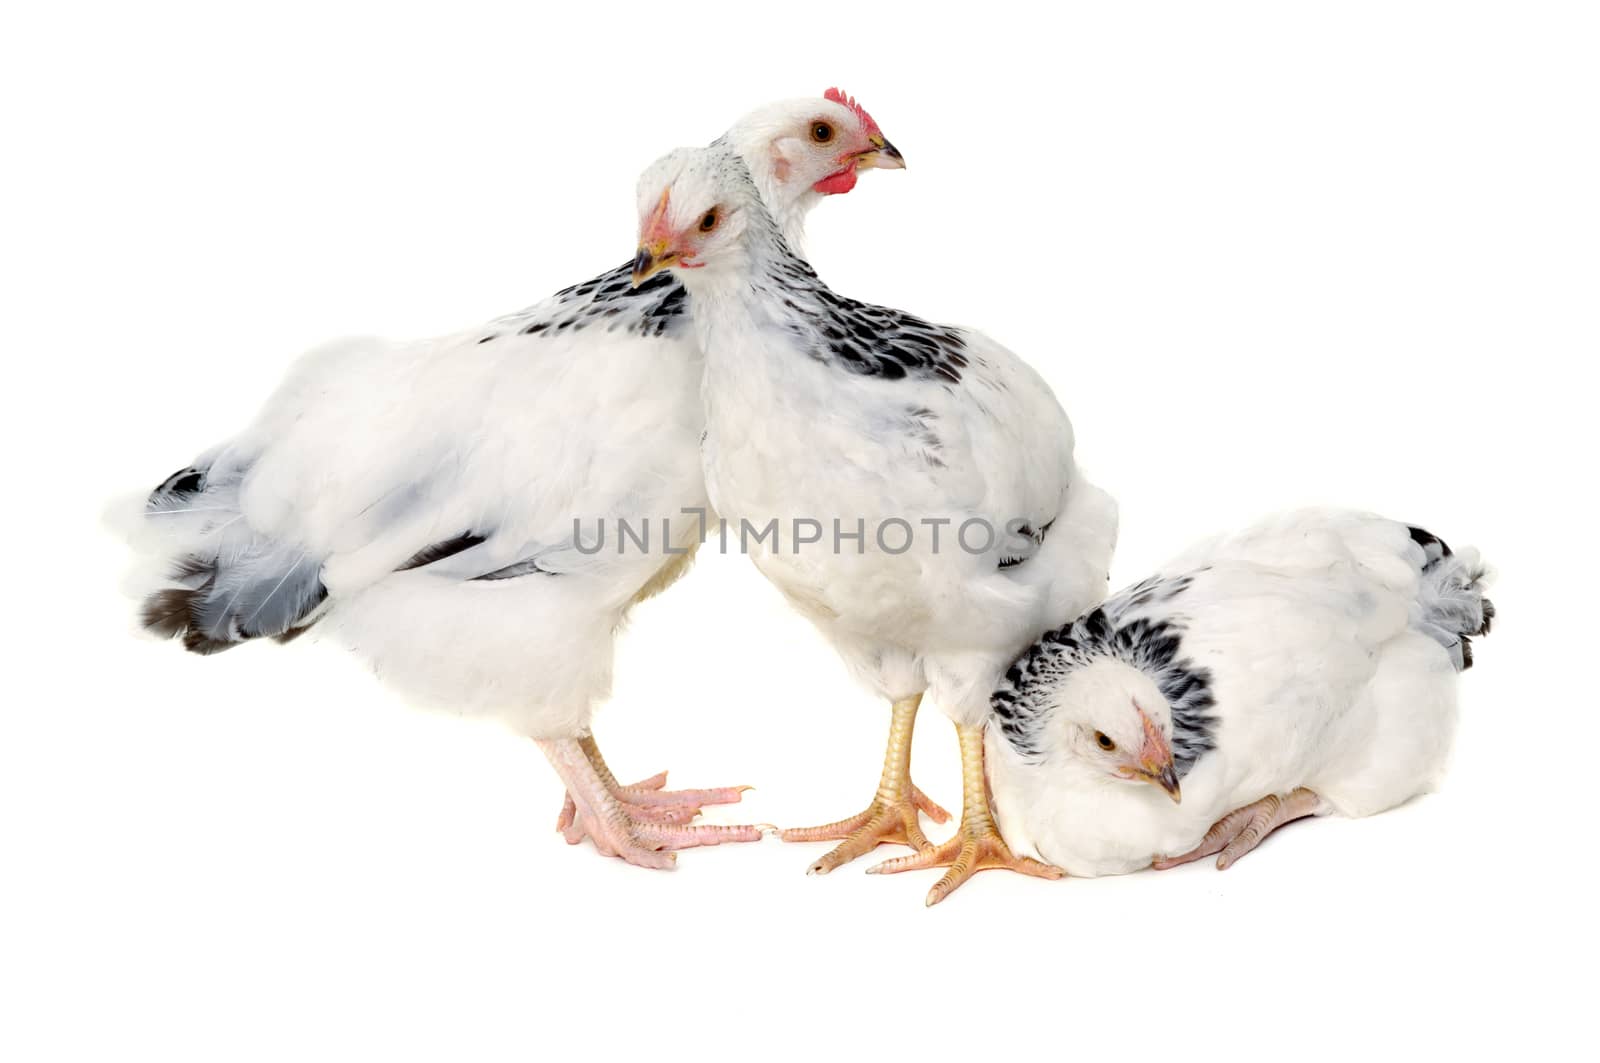 Chickens is standing and looking. Isolated on a white background.